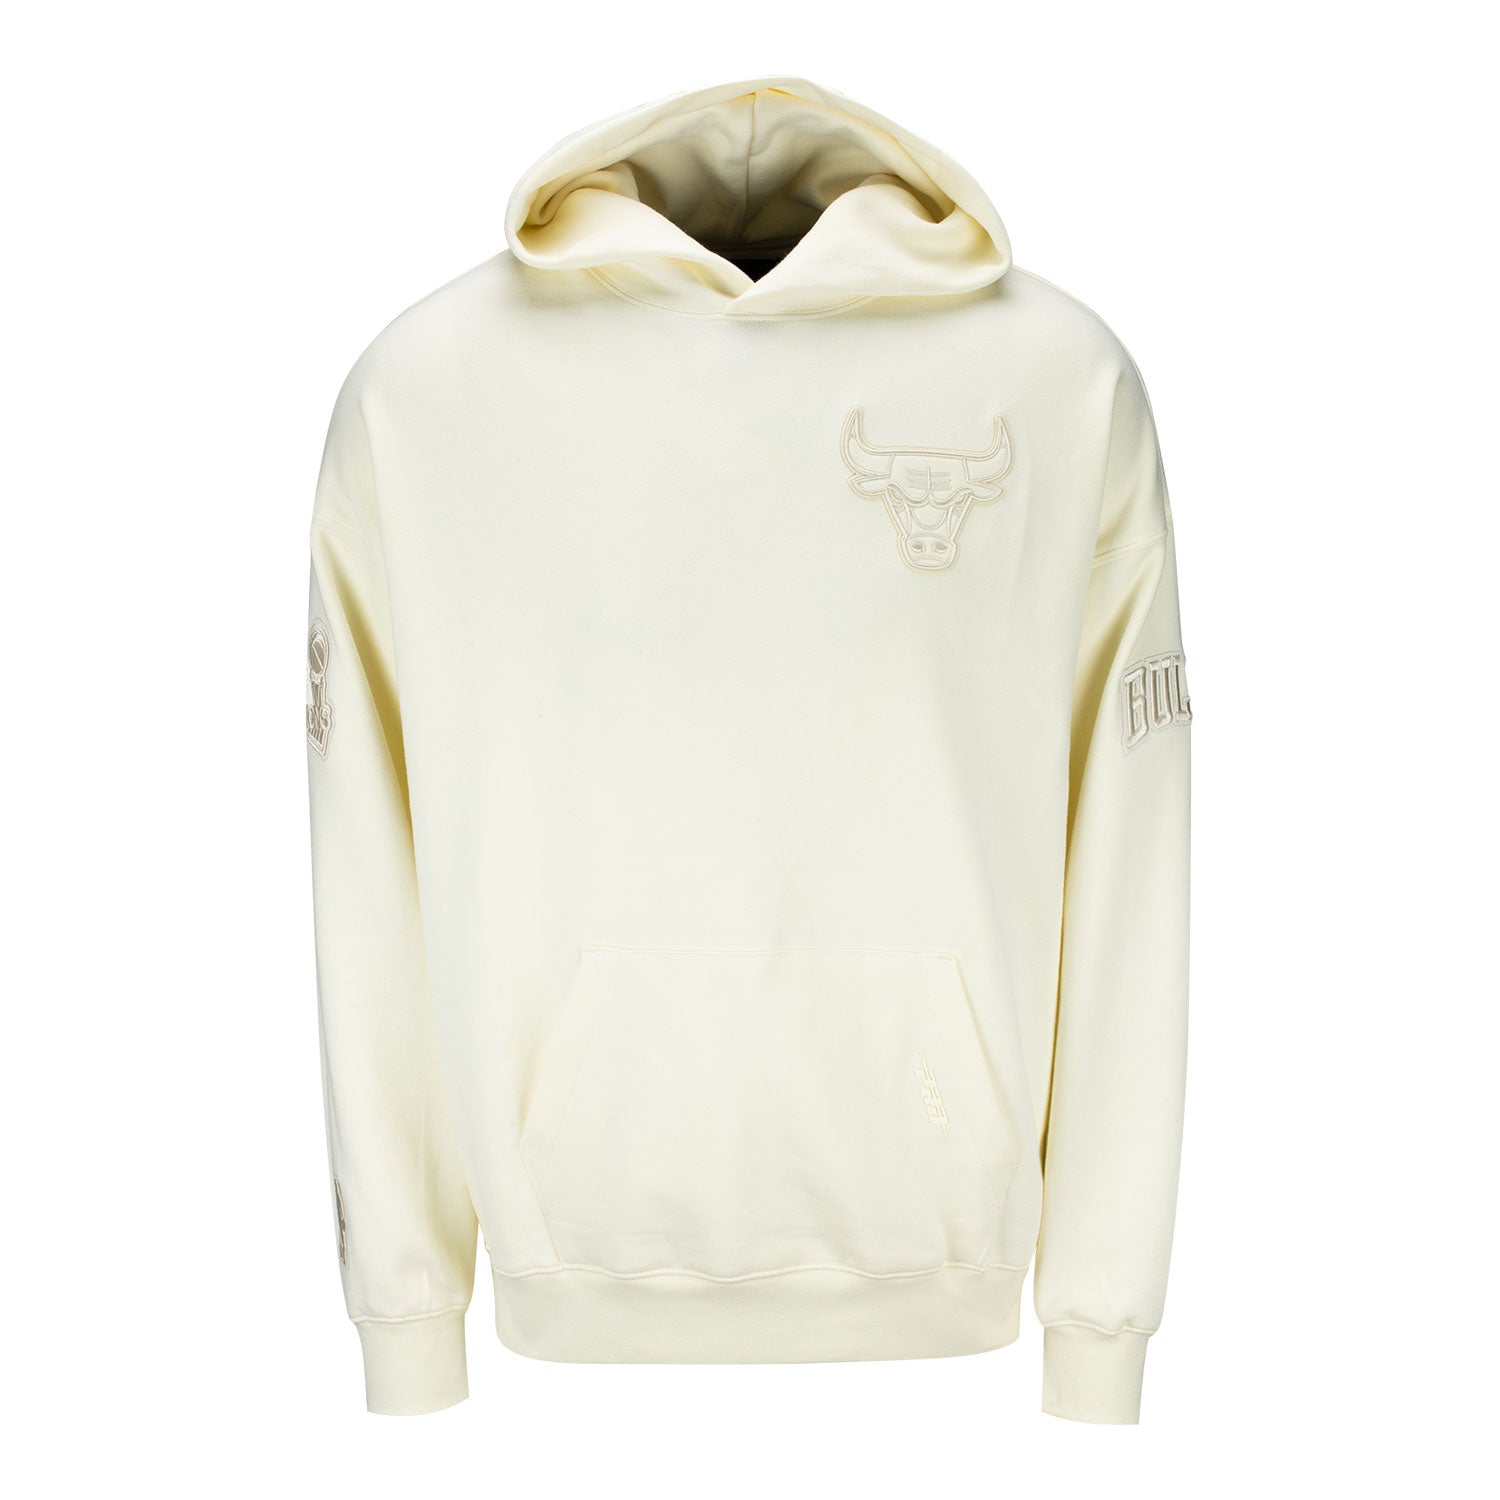 Chicago Bulls Pro Standard White Collection Pullover Hoodie